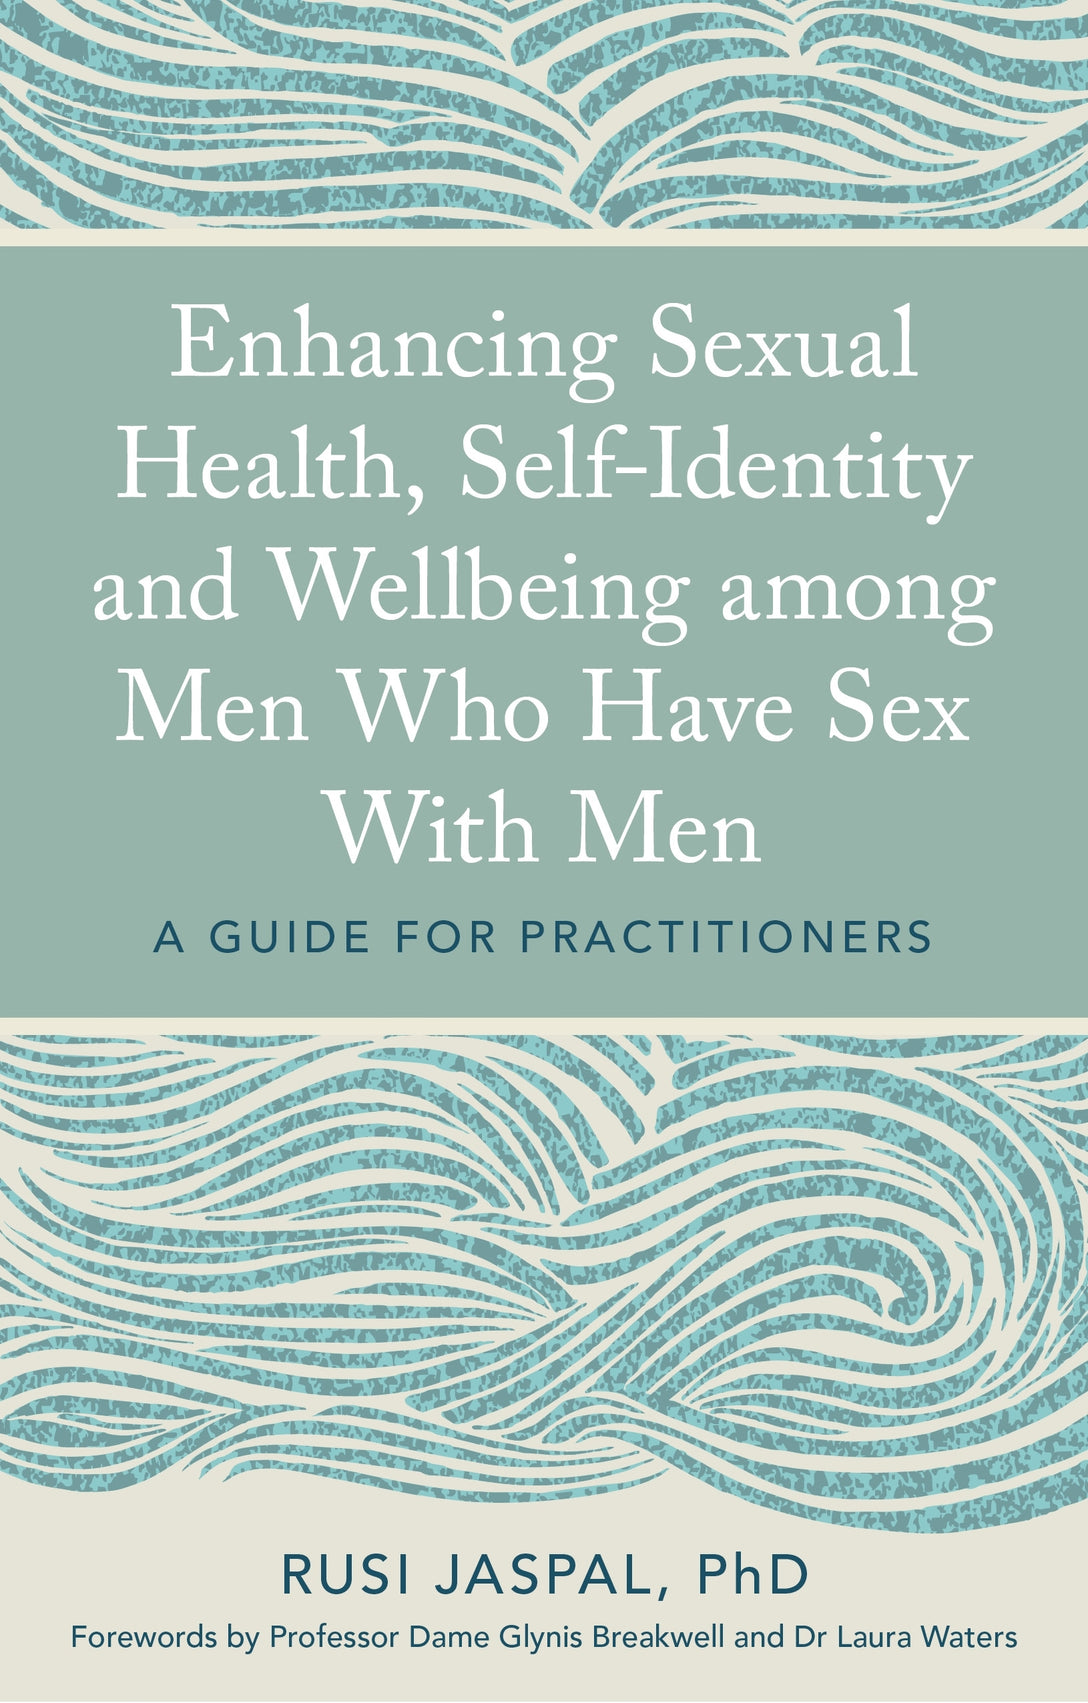 Enhancing Sexual Health, Self-Identity and Wellbeing among Men Who Have Sex With Men by Rusi Jaspal, Professor Dame Glynis Breakwell, Dr Laura Waters